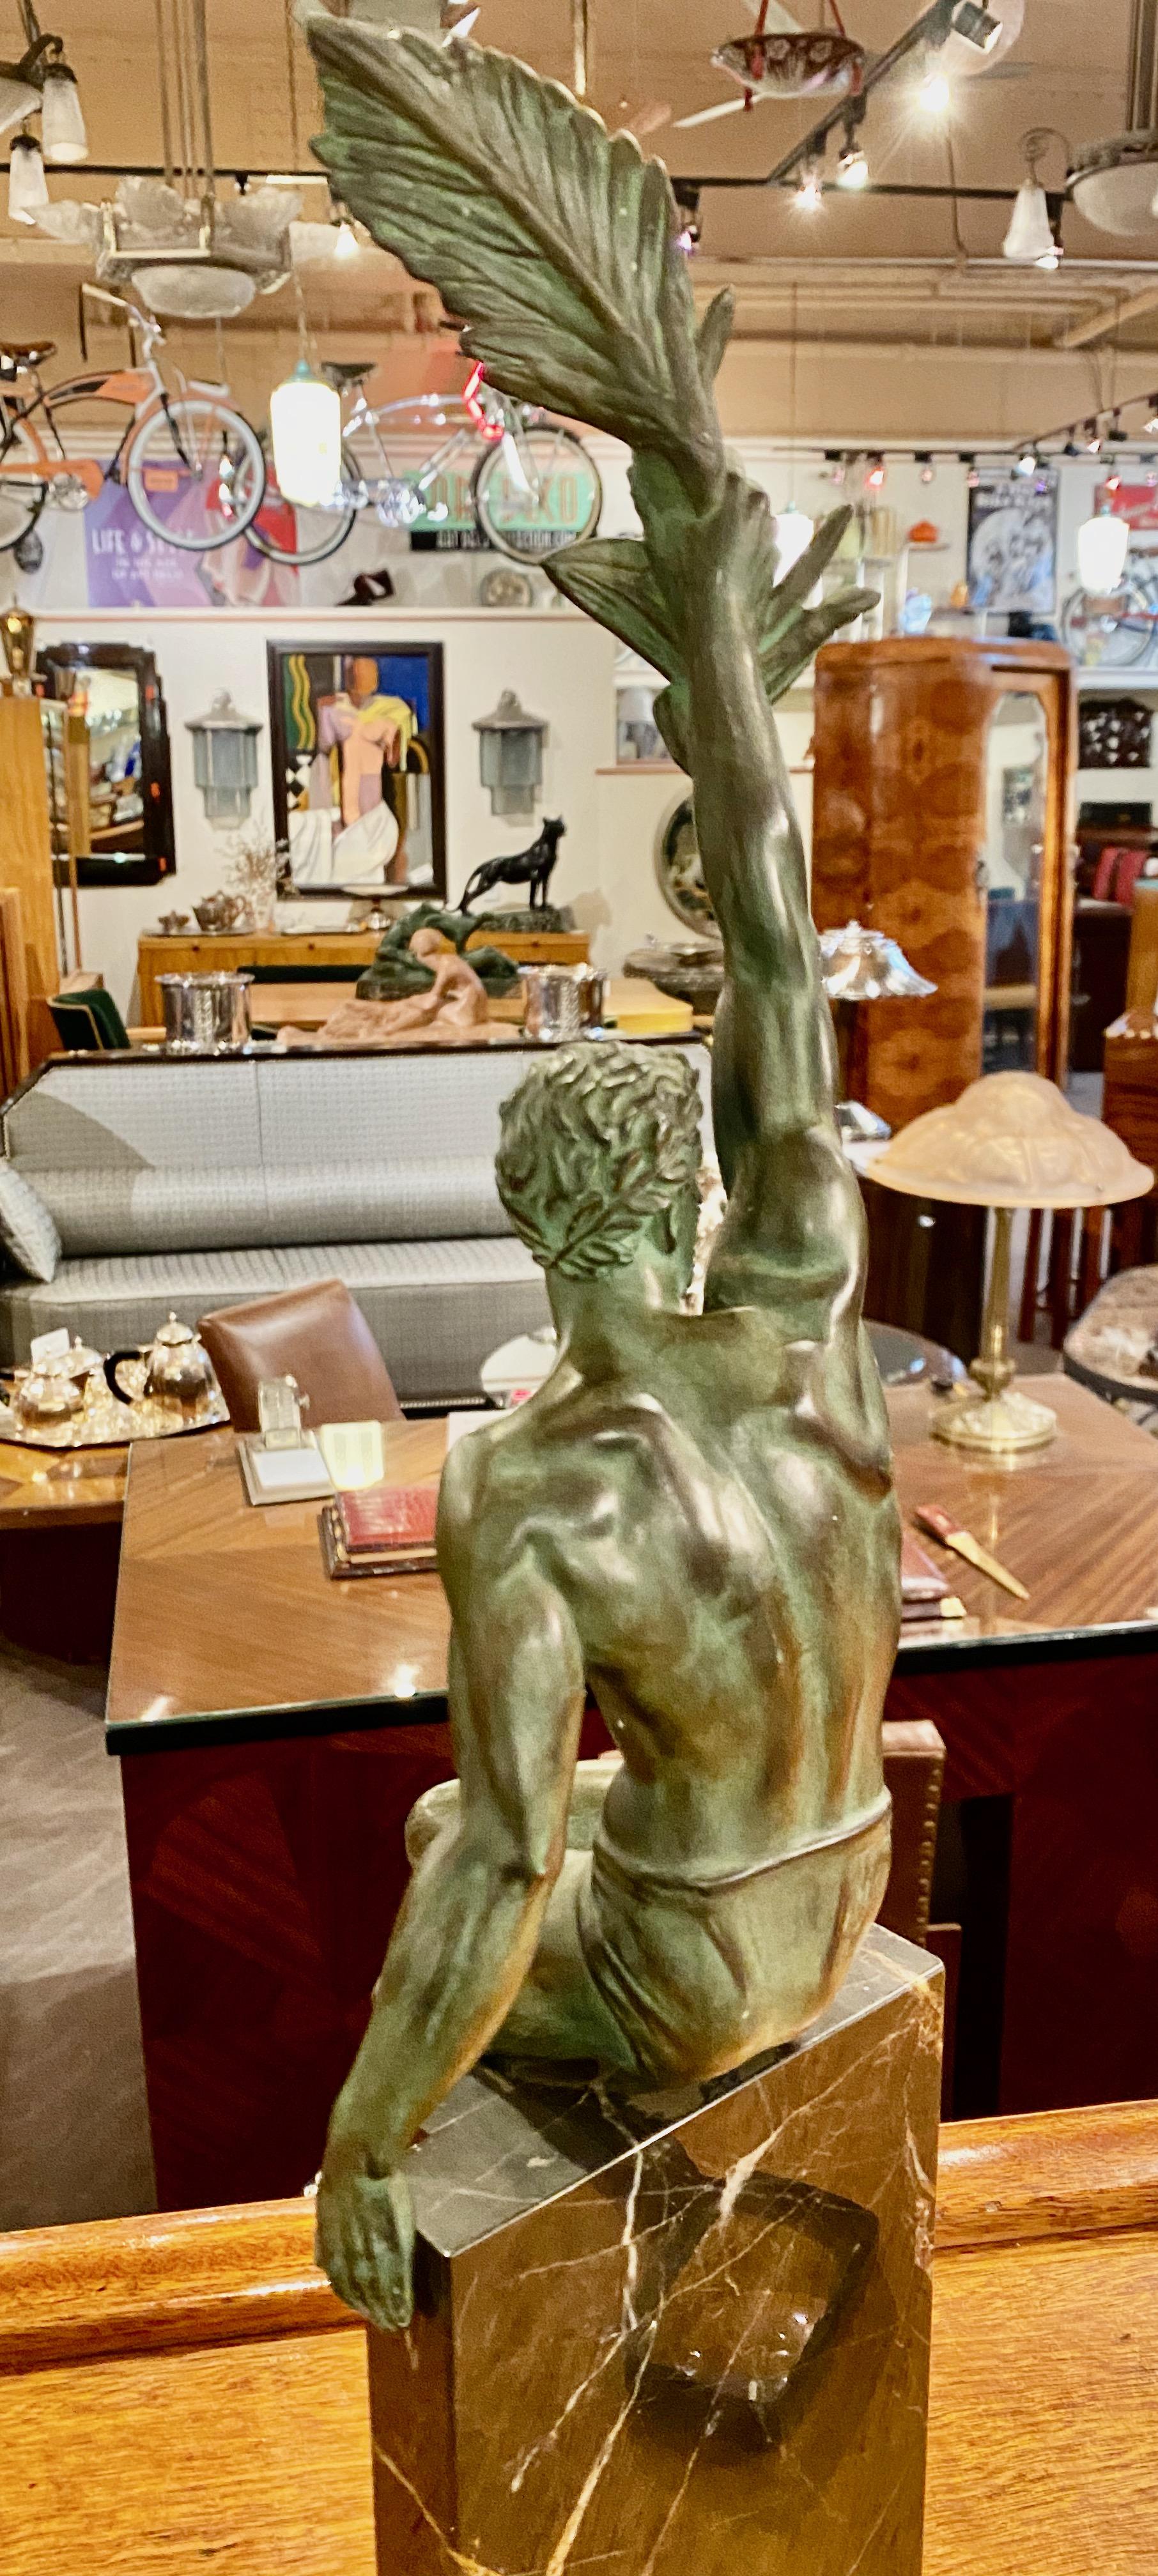 An original French Art Deco sculpture of a triumphant male wearing a loin cloth, known as “Gloire” by Pierre Le Faguays (active in France, born 1892 – died 1962). This piece dates circa 1920-1930. The figure sits on top of a tall black marble